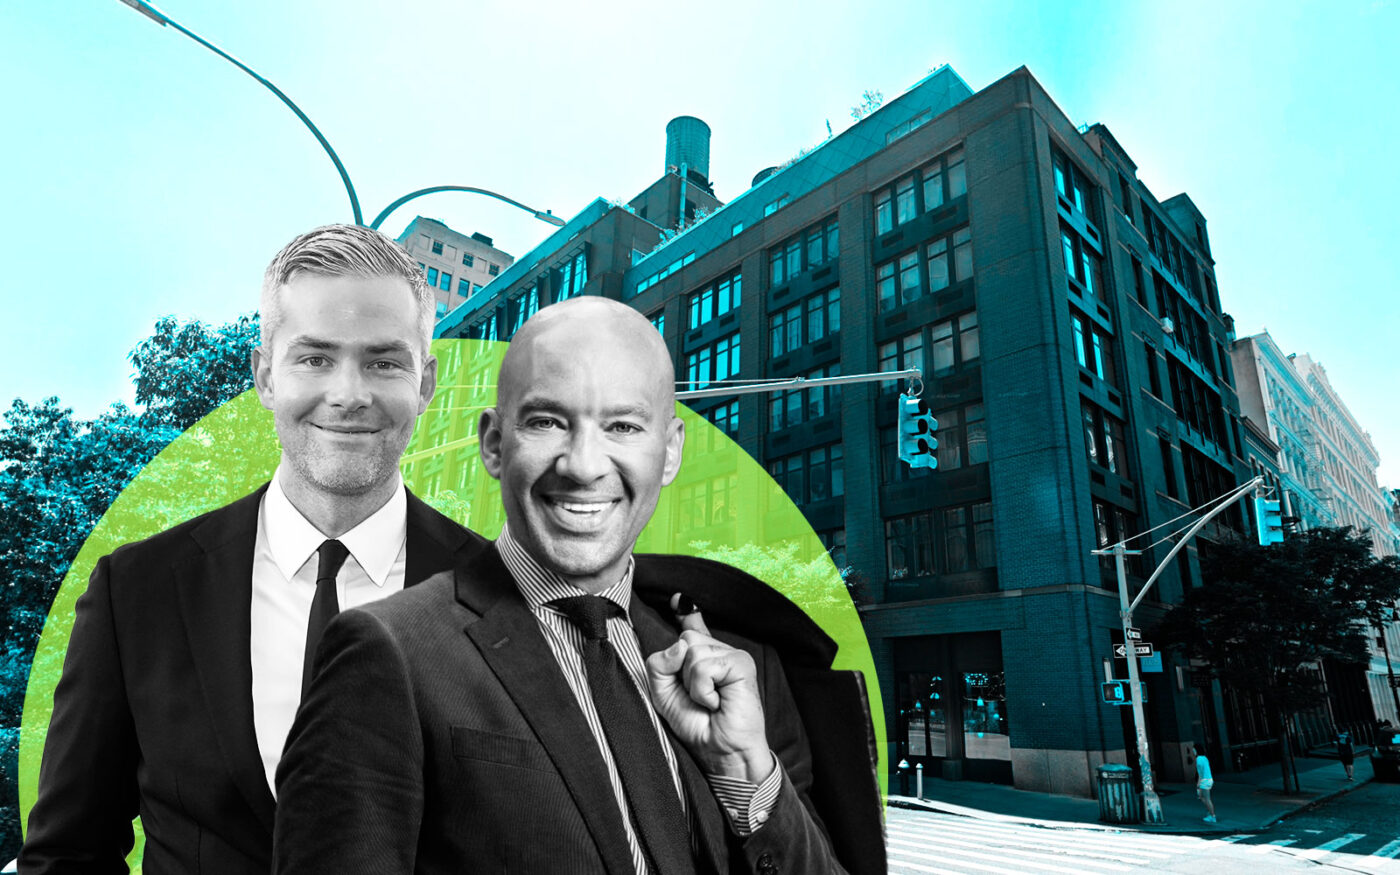 151 Wooster Street in Soho with Ryan Serhant and John Gomes